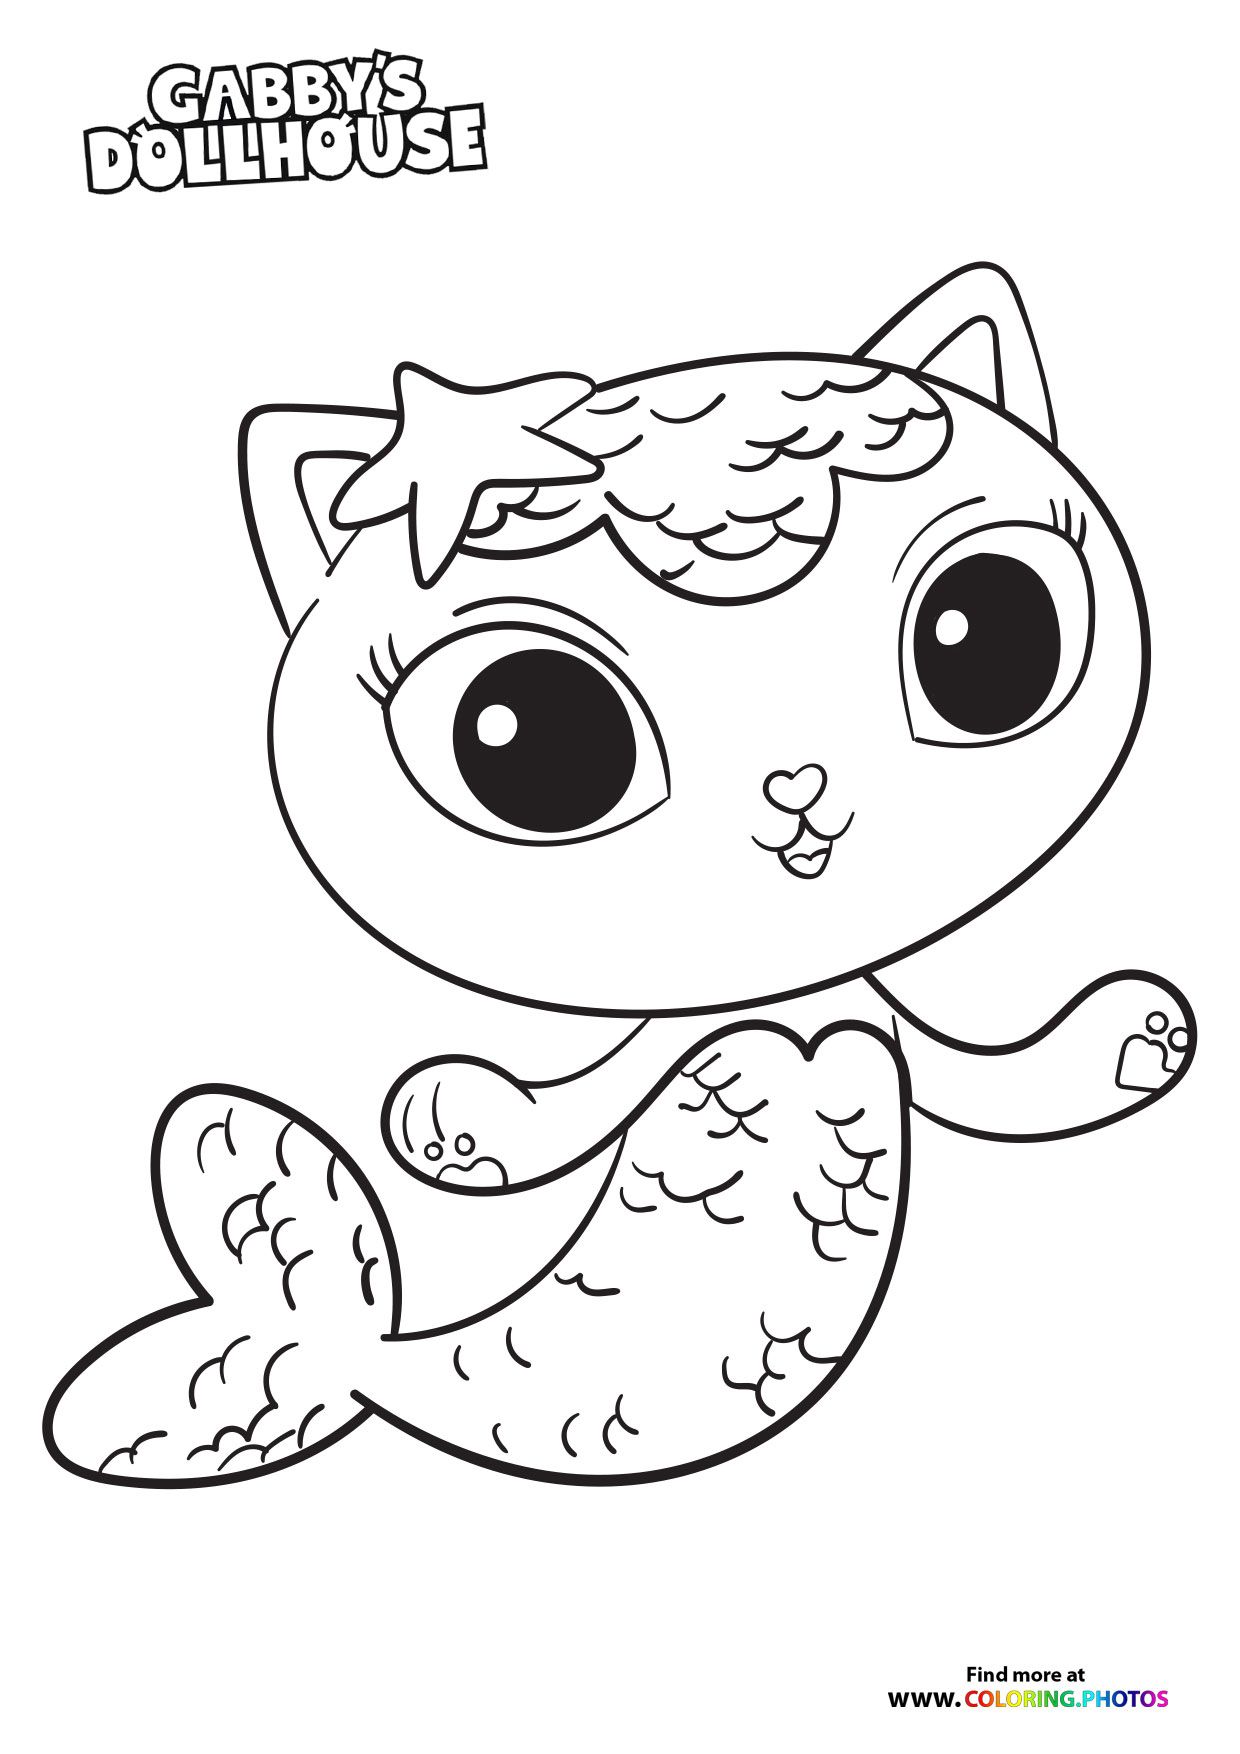 Mercat - Gaby's Dollhouse - Coloring Pages for kids | Doll house, Cat  coloring page, Coloring pages